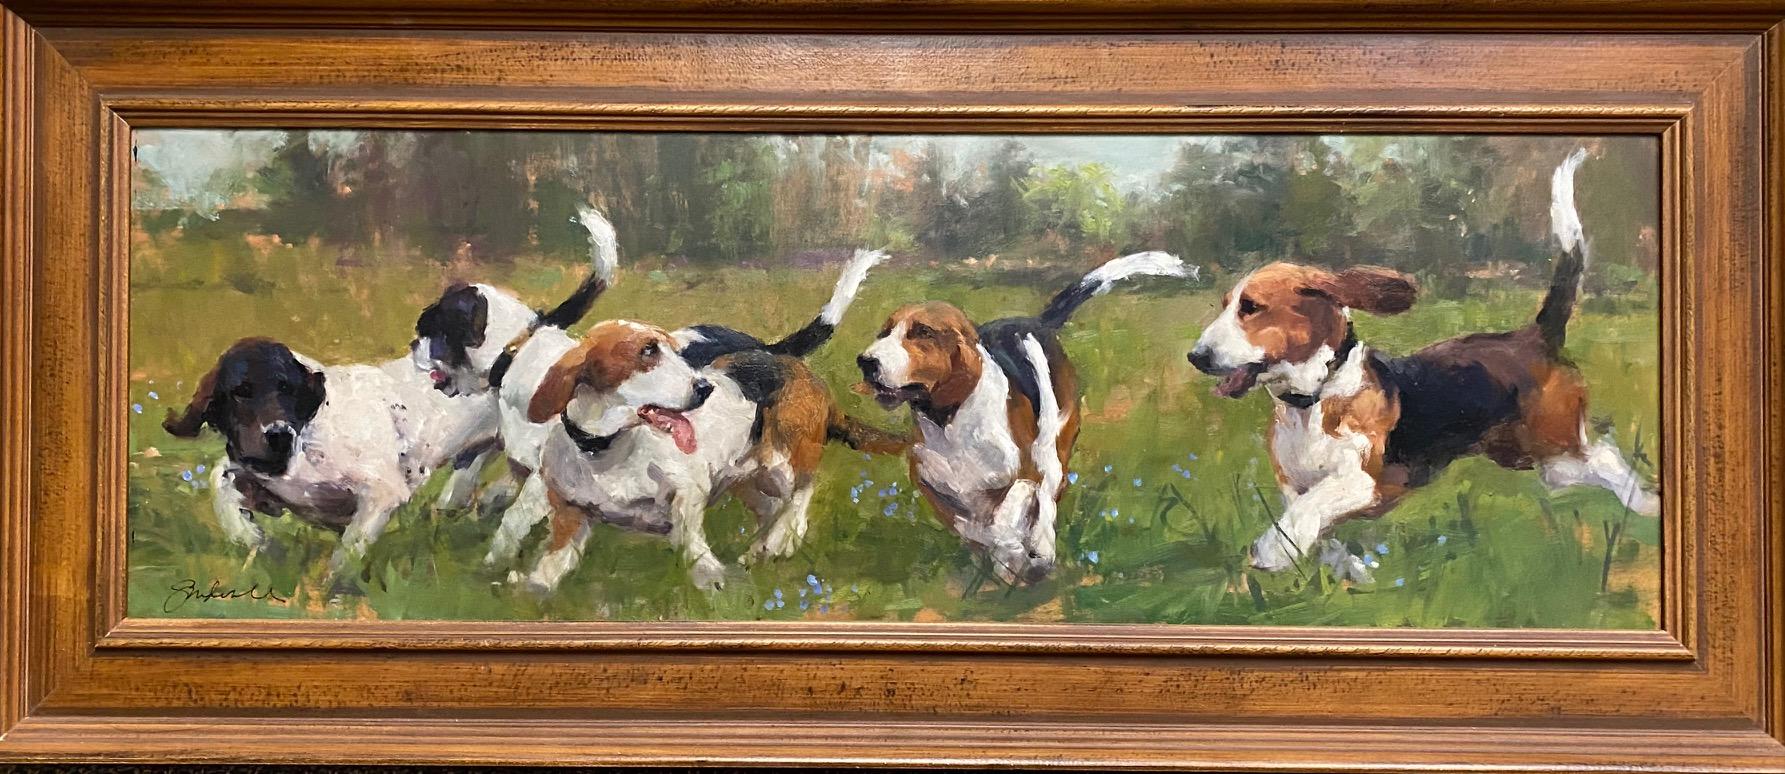 Who Let the Dogs Out?, original 10x30 dog portrait and landscape